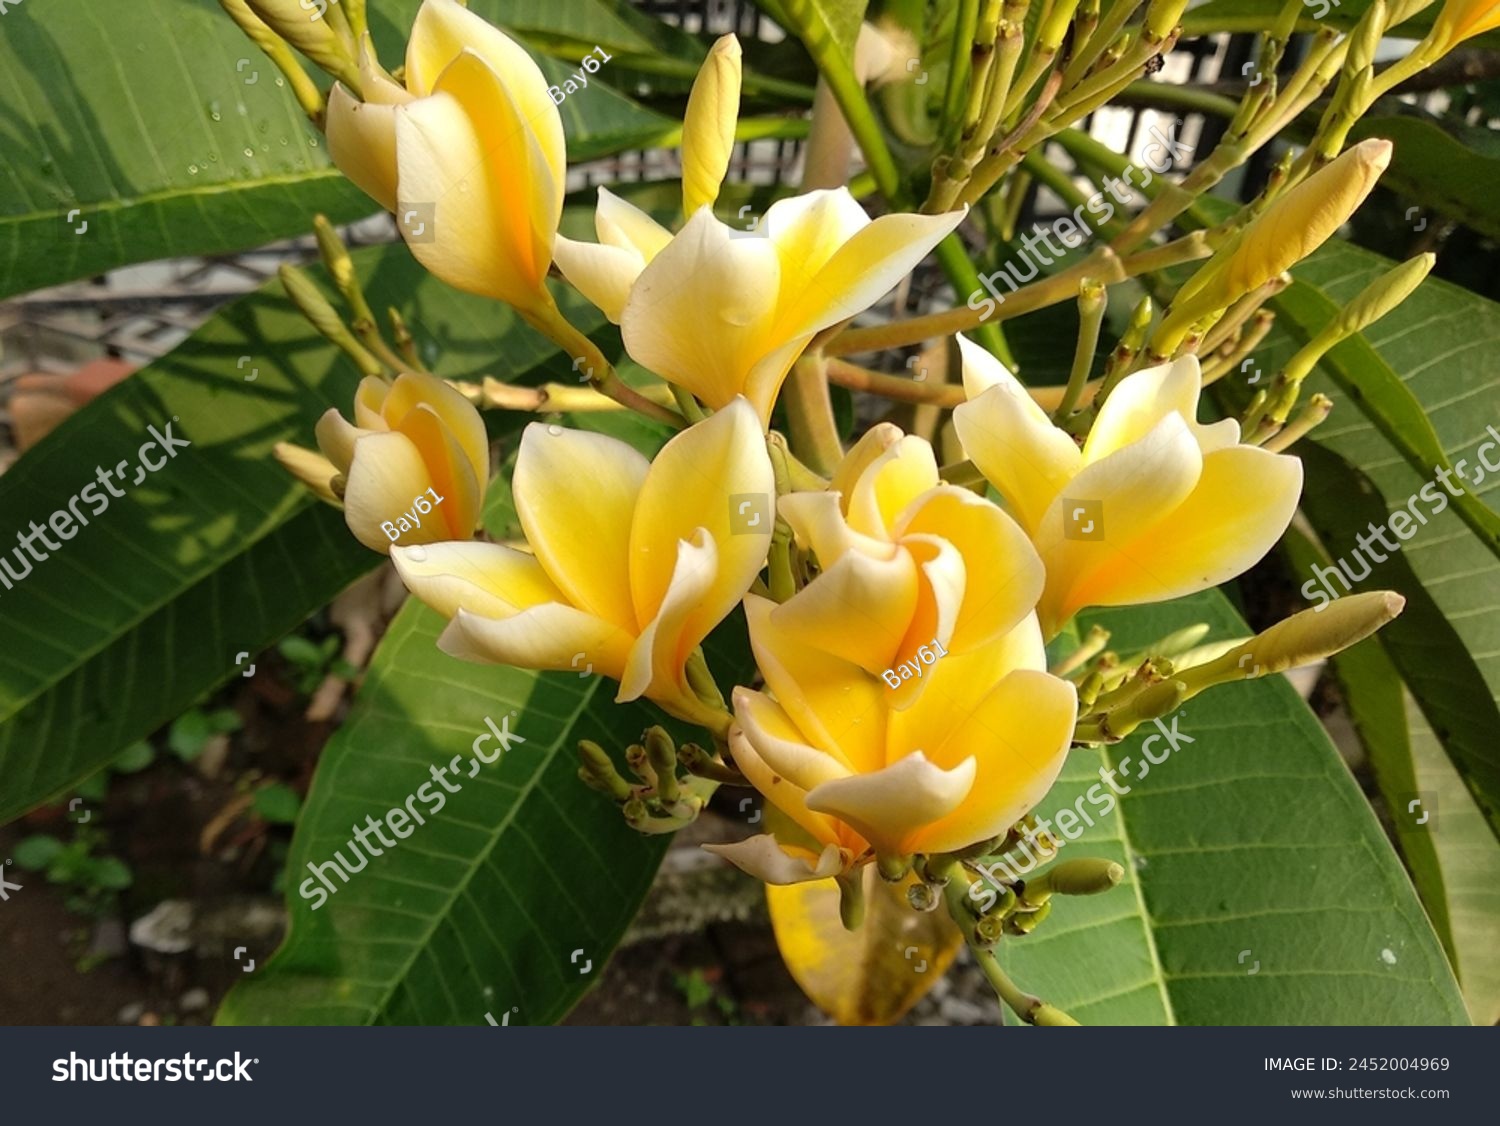 Plumeria are tropical trees with dark green leathery leaves and white, yellow or pink flowers that are known for their heady fragrance. #2452004969